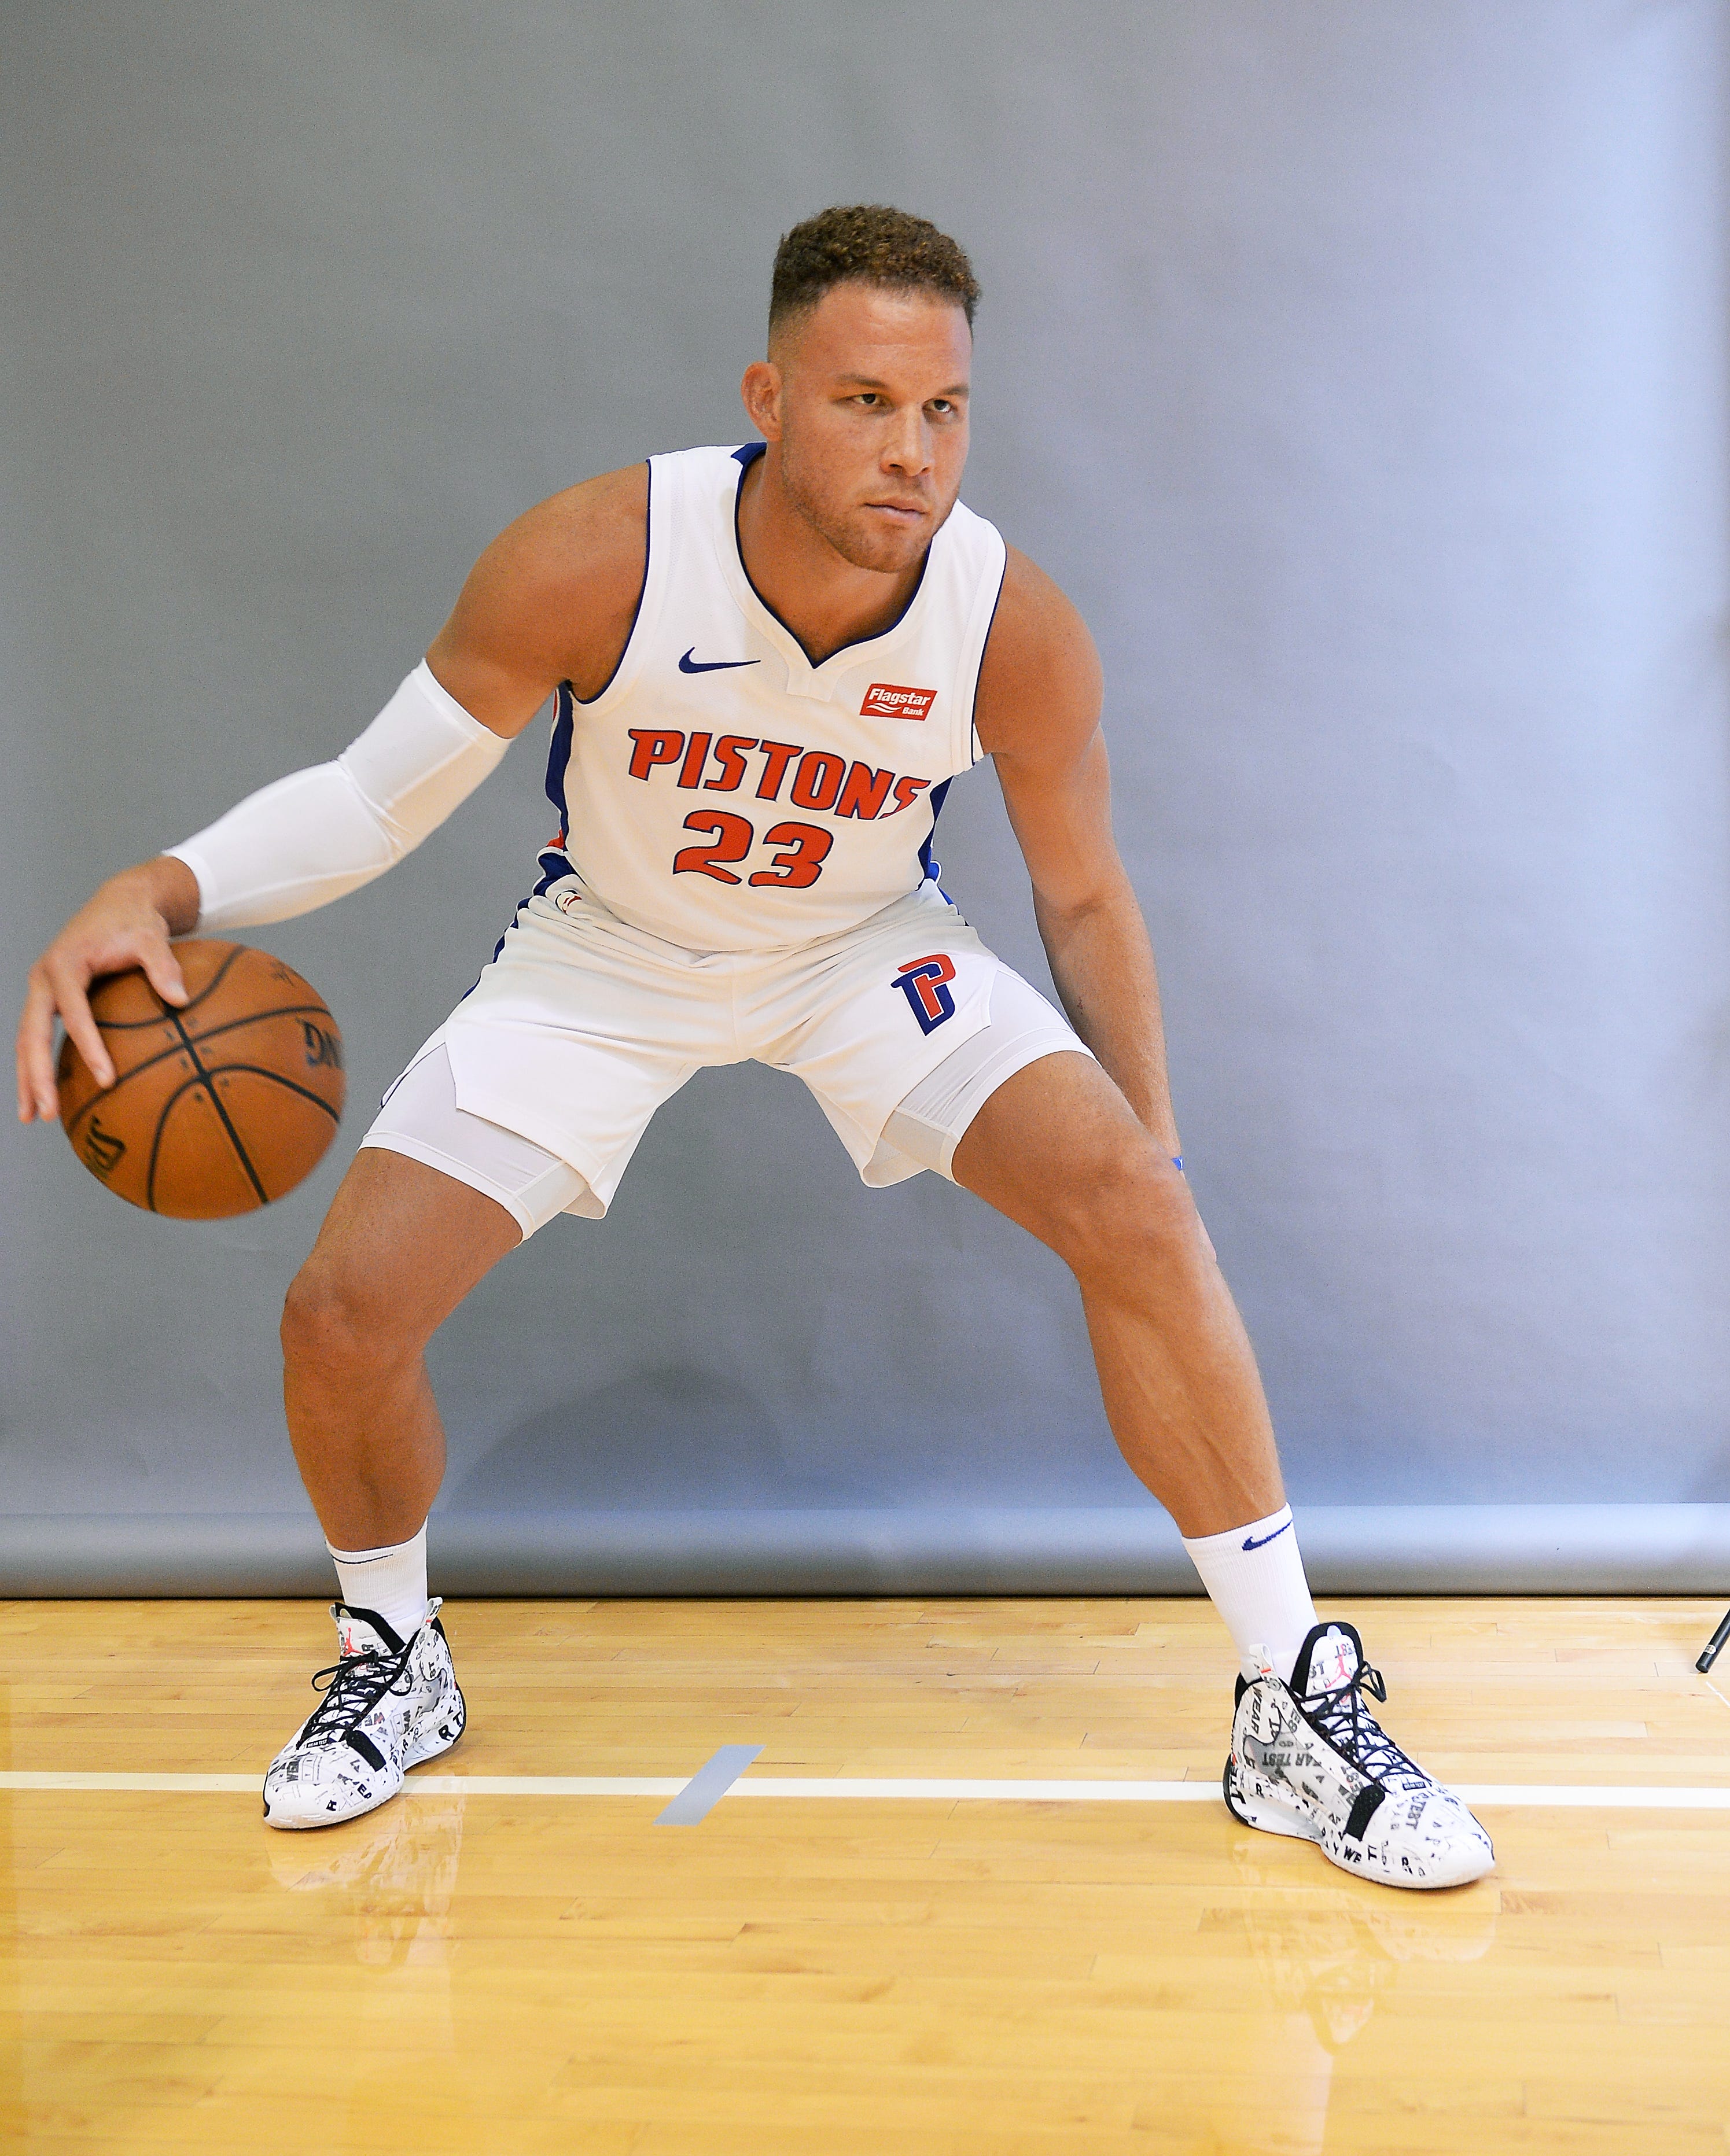 Blake Griffin, shows off his dribbling skills during his photo shoot.